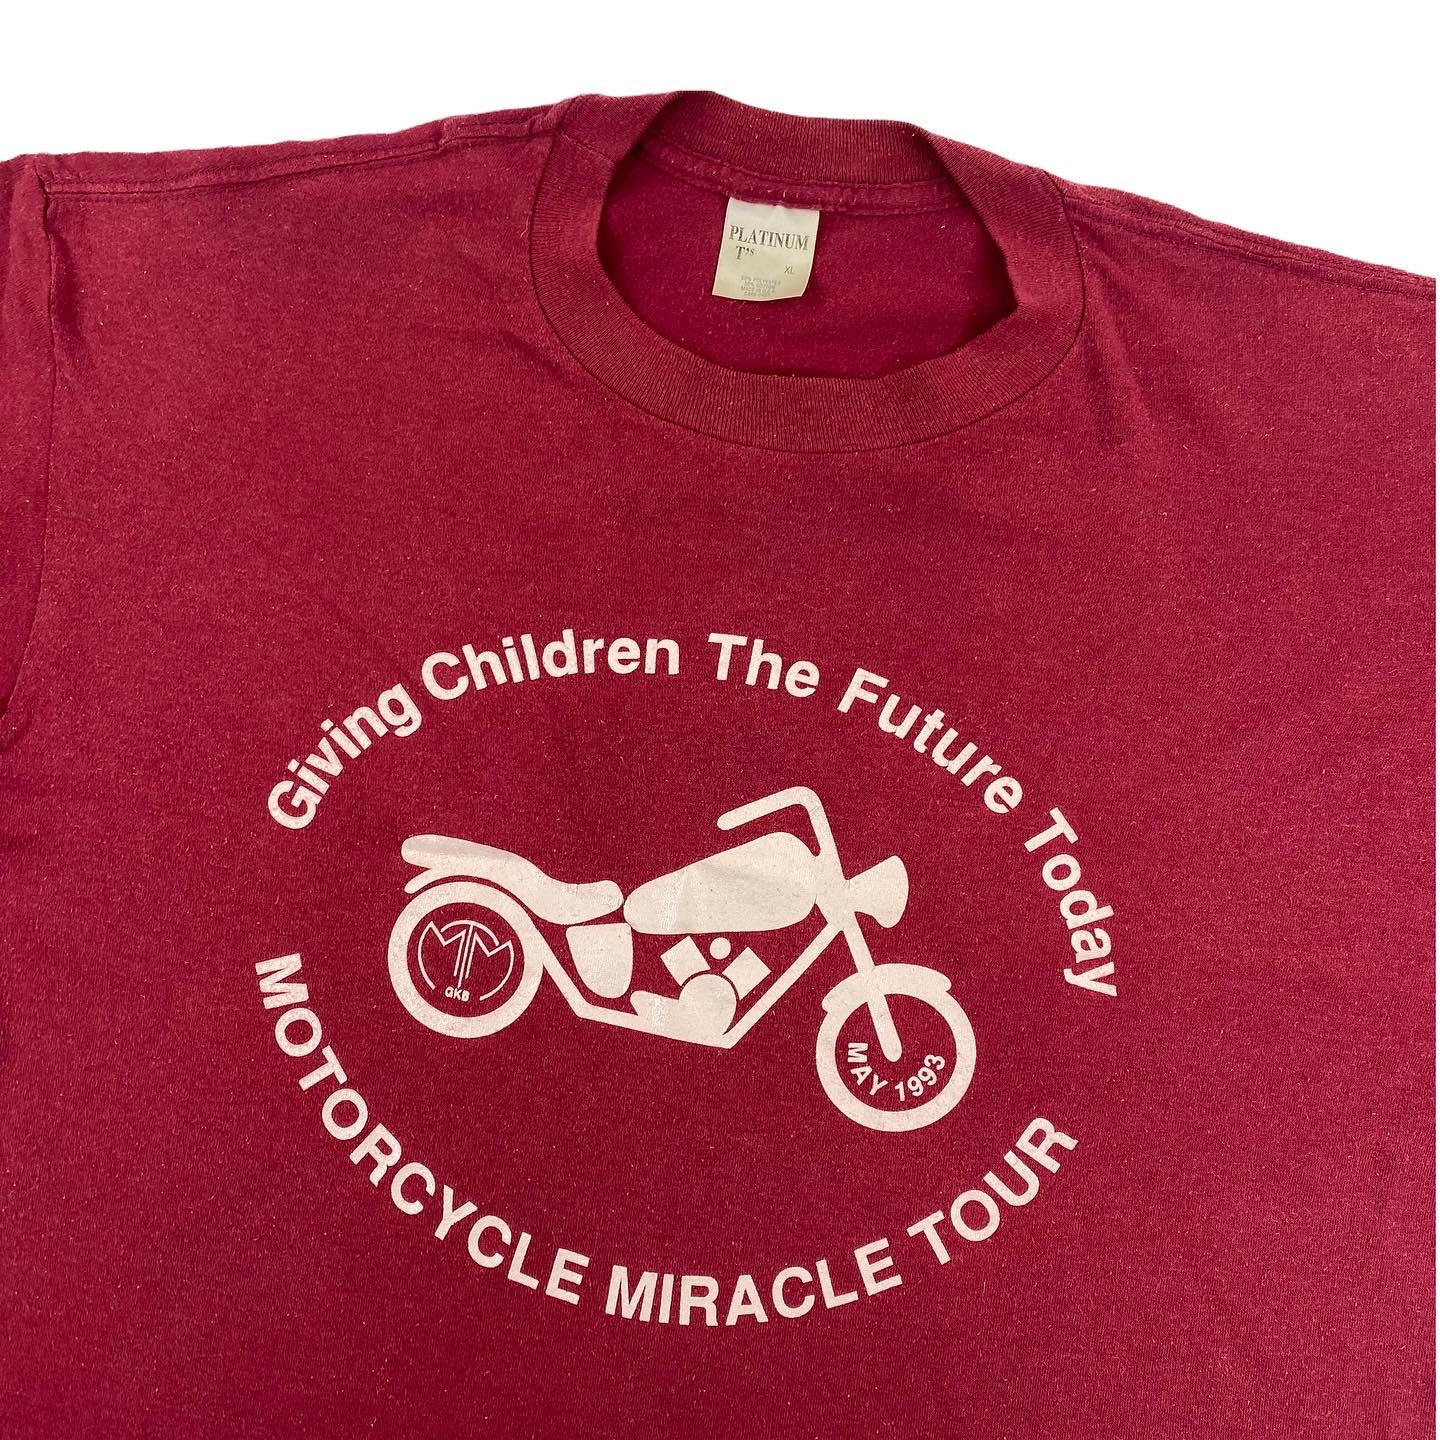 1993 Motorcycle miracle tour tee. L/XL